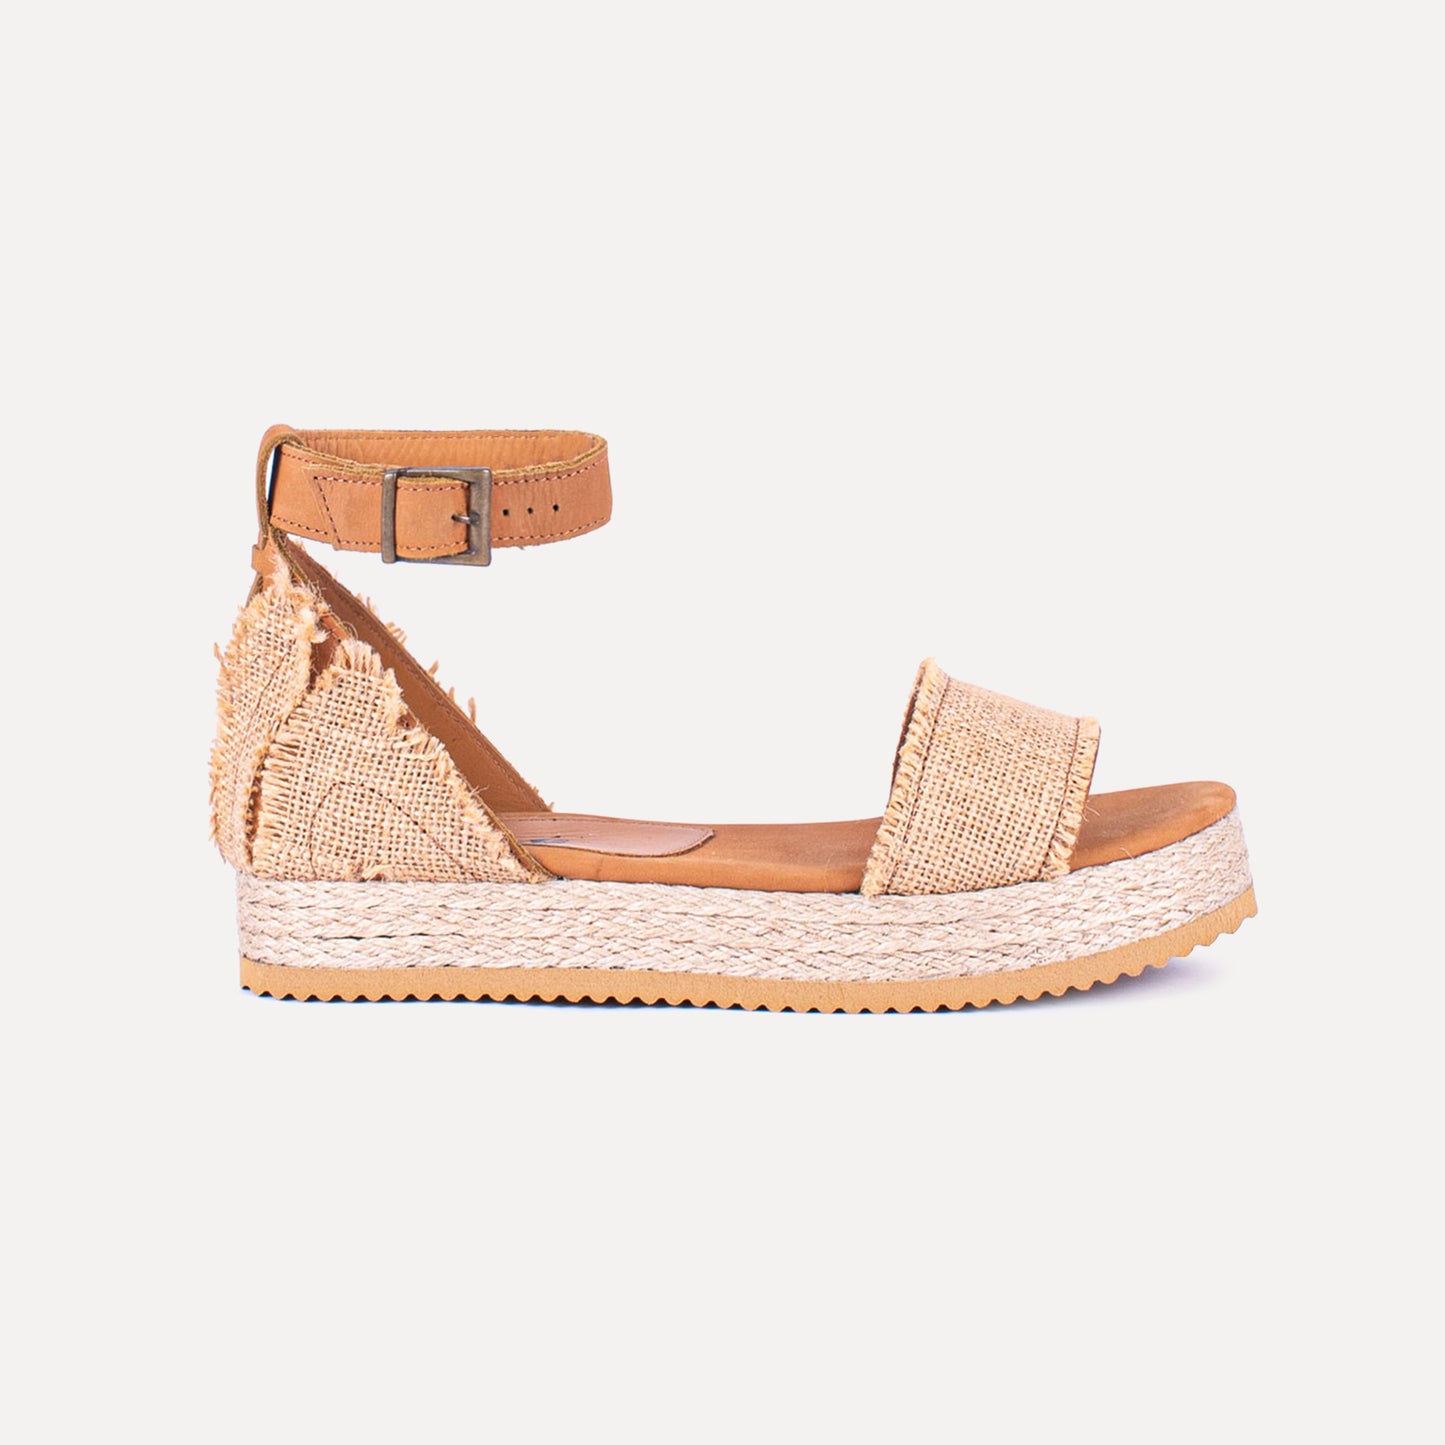 Chama - sandals with jute